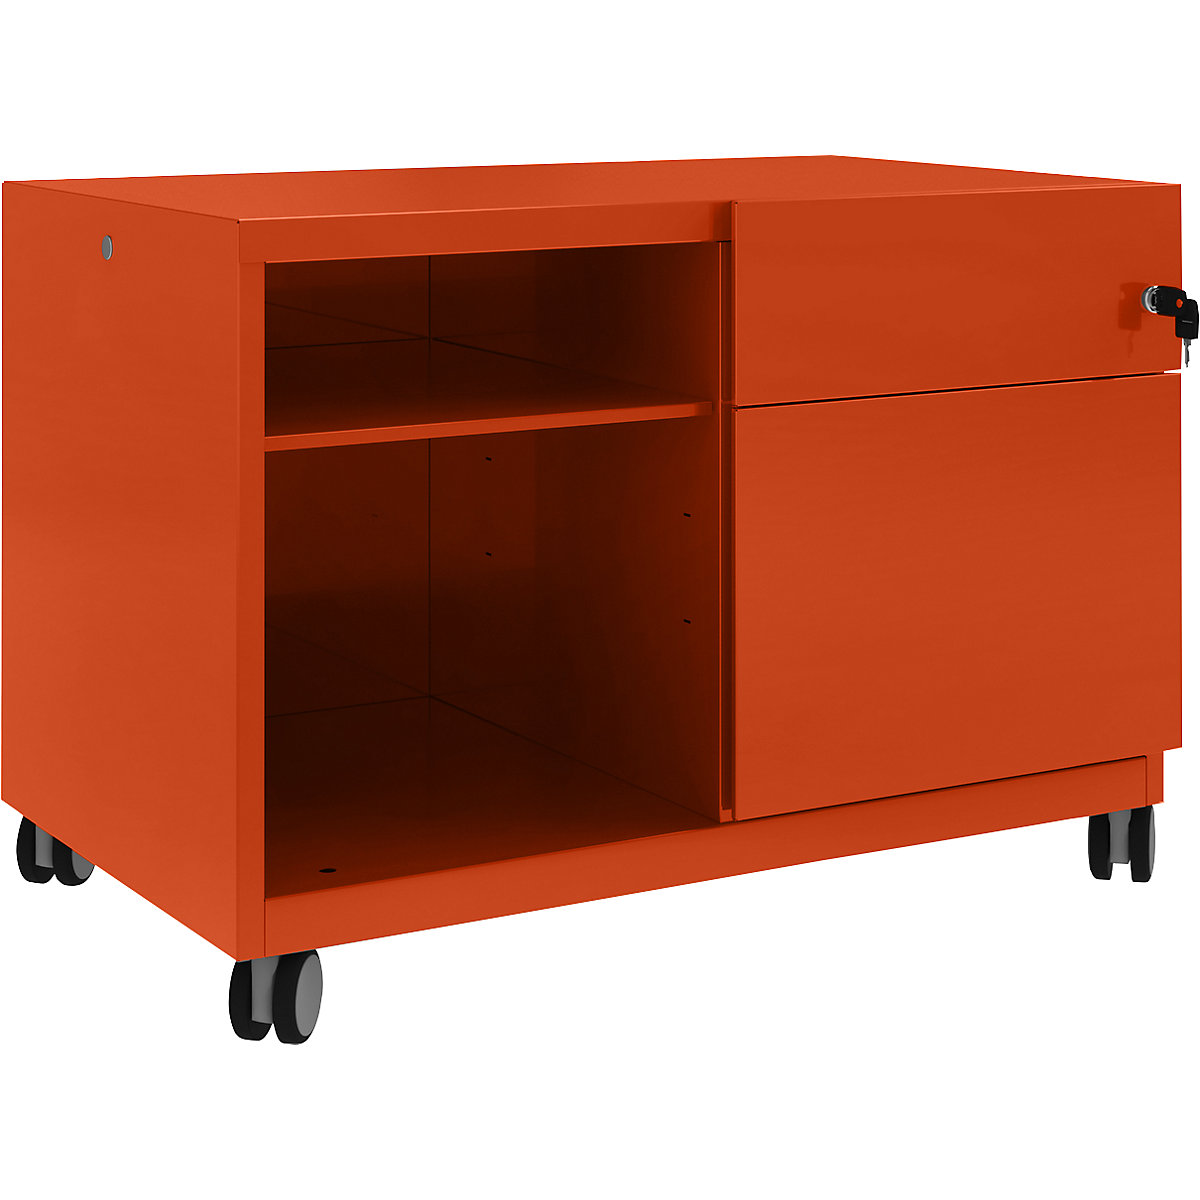 Note™ CADDY, HxBxT 563 x 800 x 490 mm – BISLEY, 1 universal drawer and suspension file drawer on the right, sevilla-26